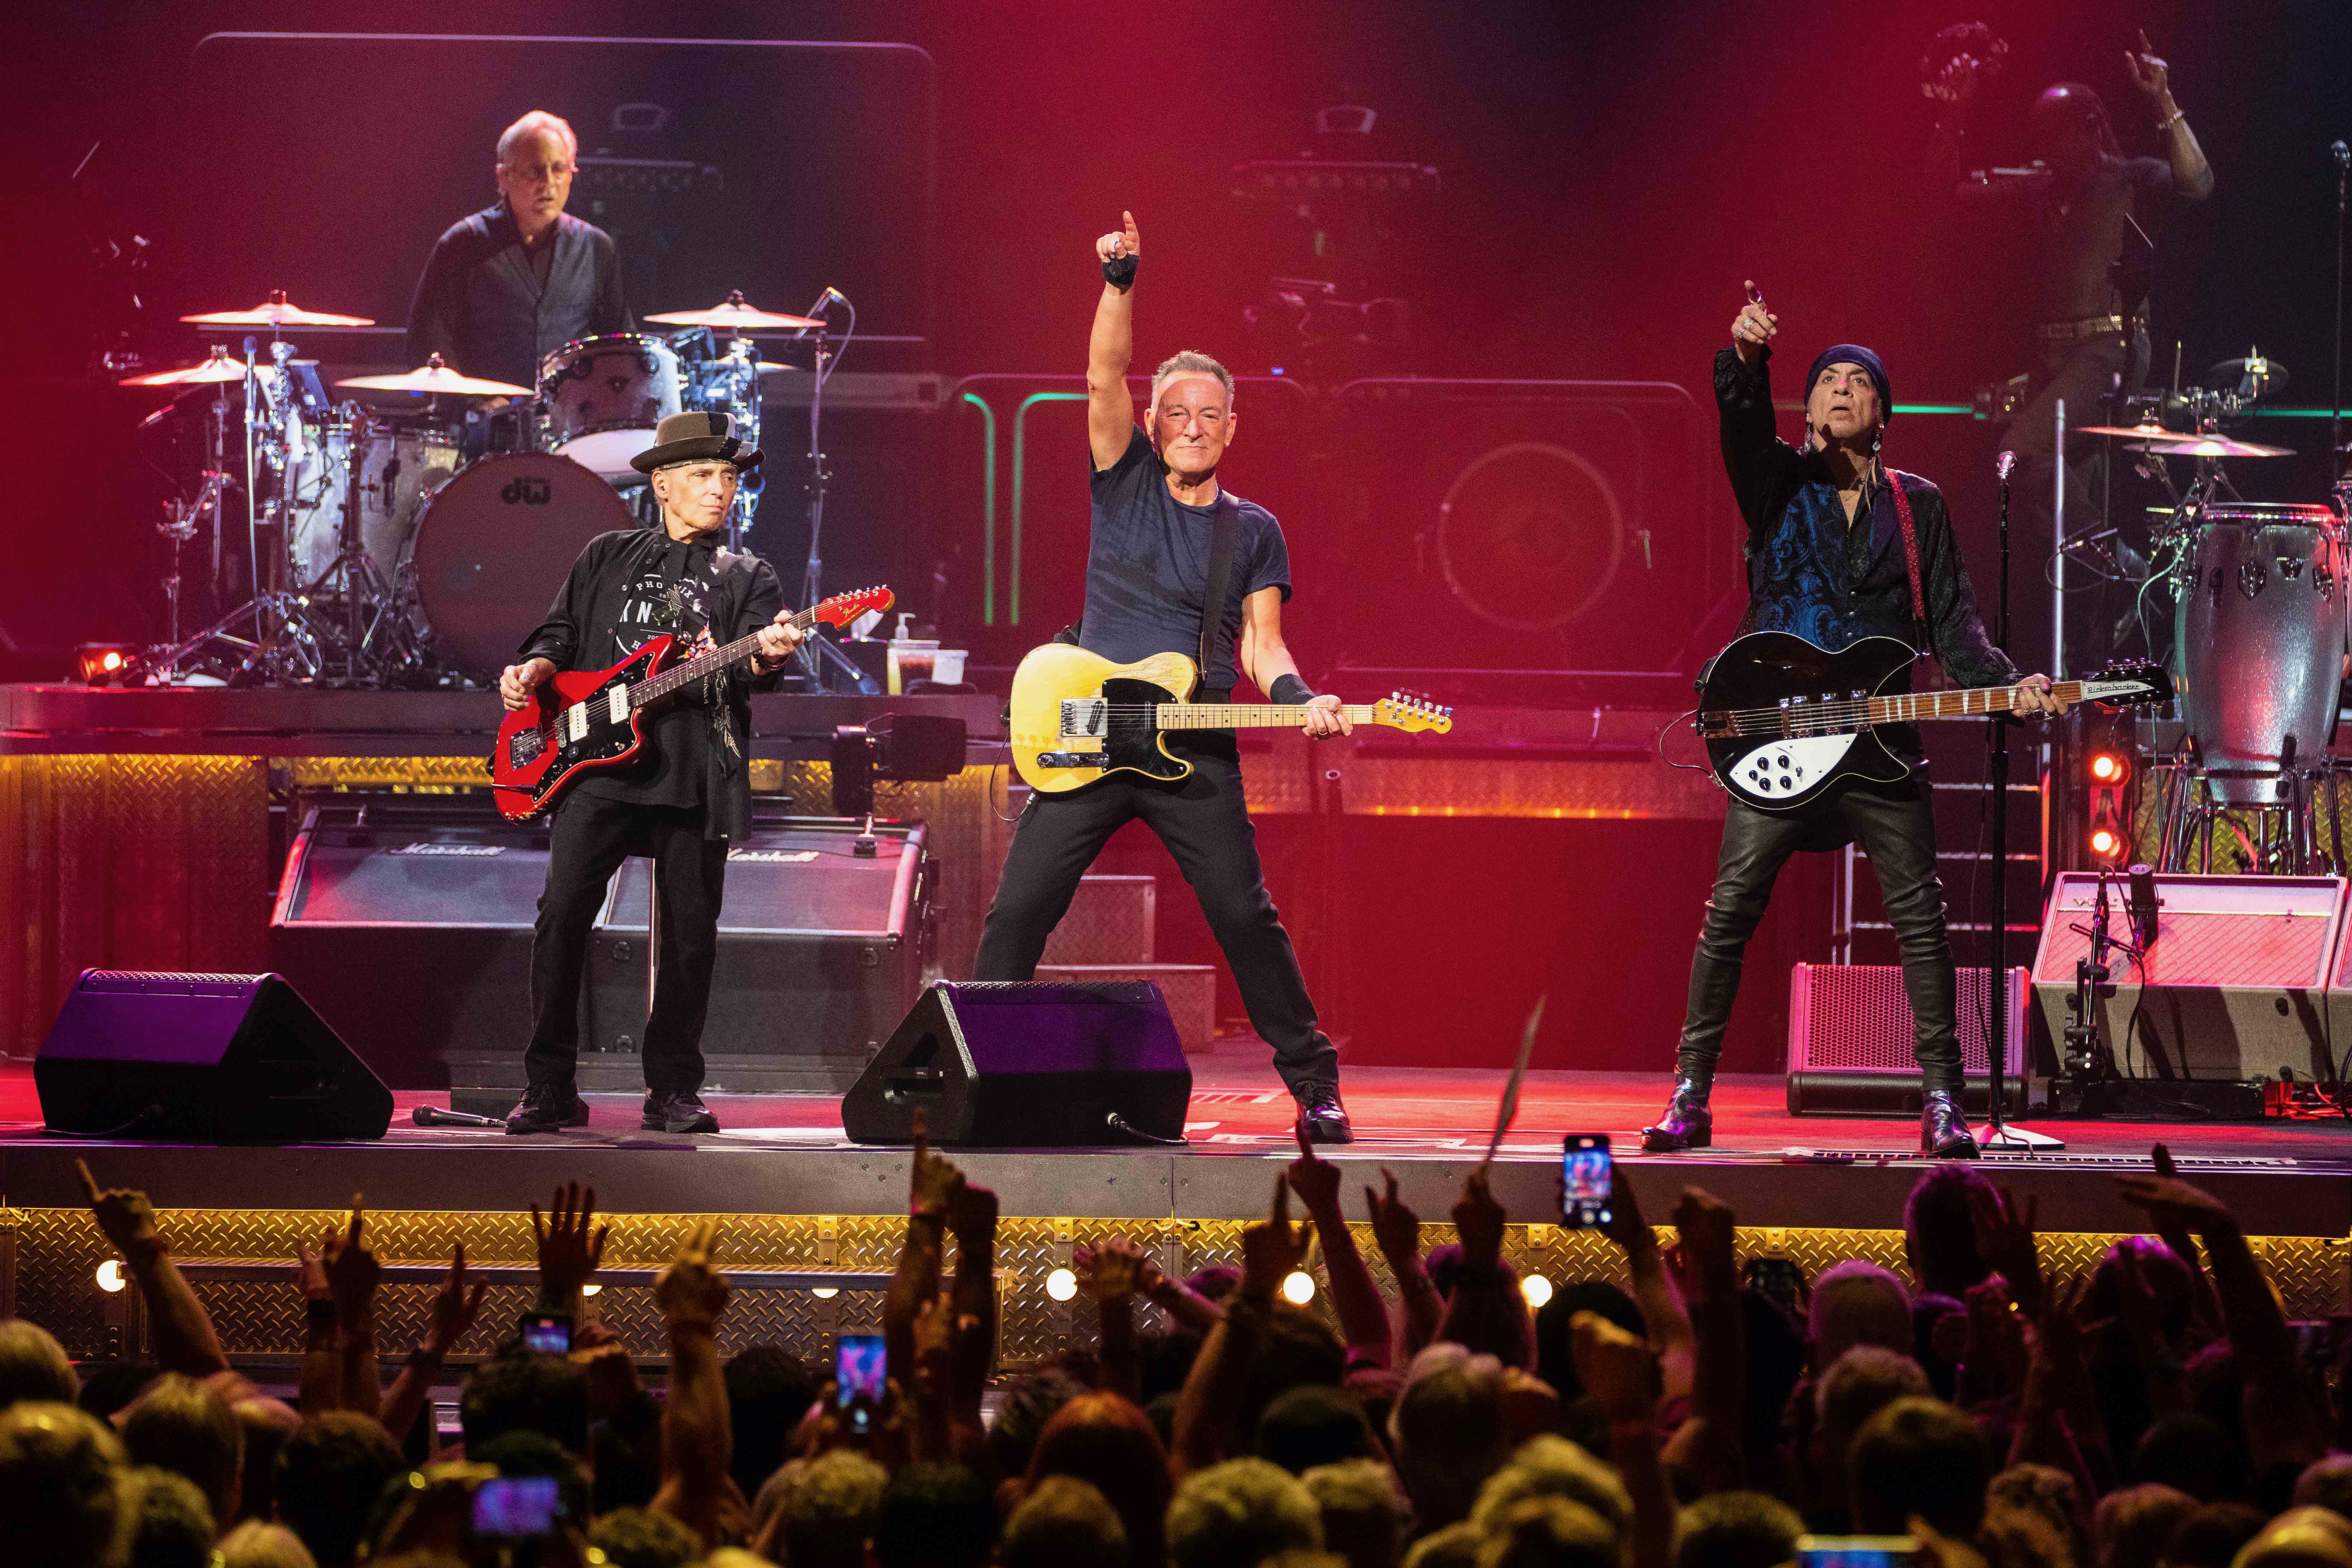 Bruce Springsteen & E Street Band at Hard Rock Live, Hollywood, FL on February 7, 2023.